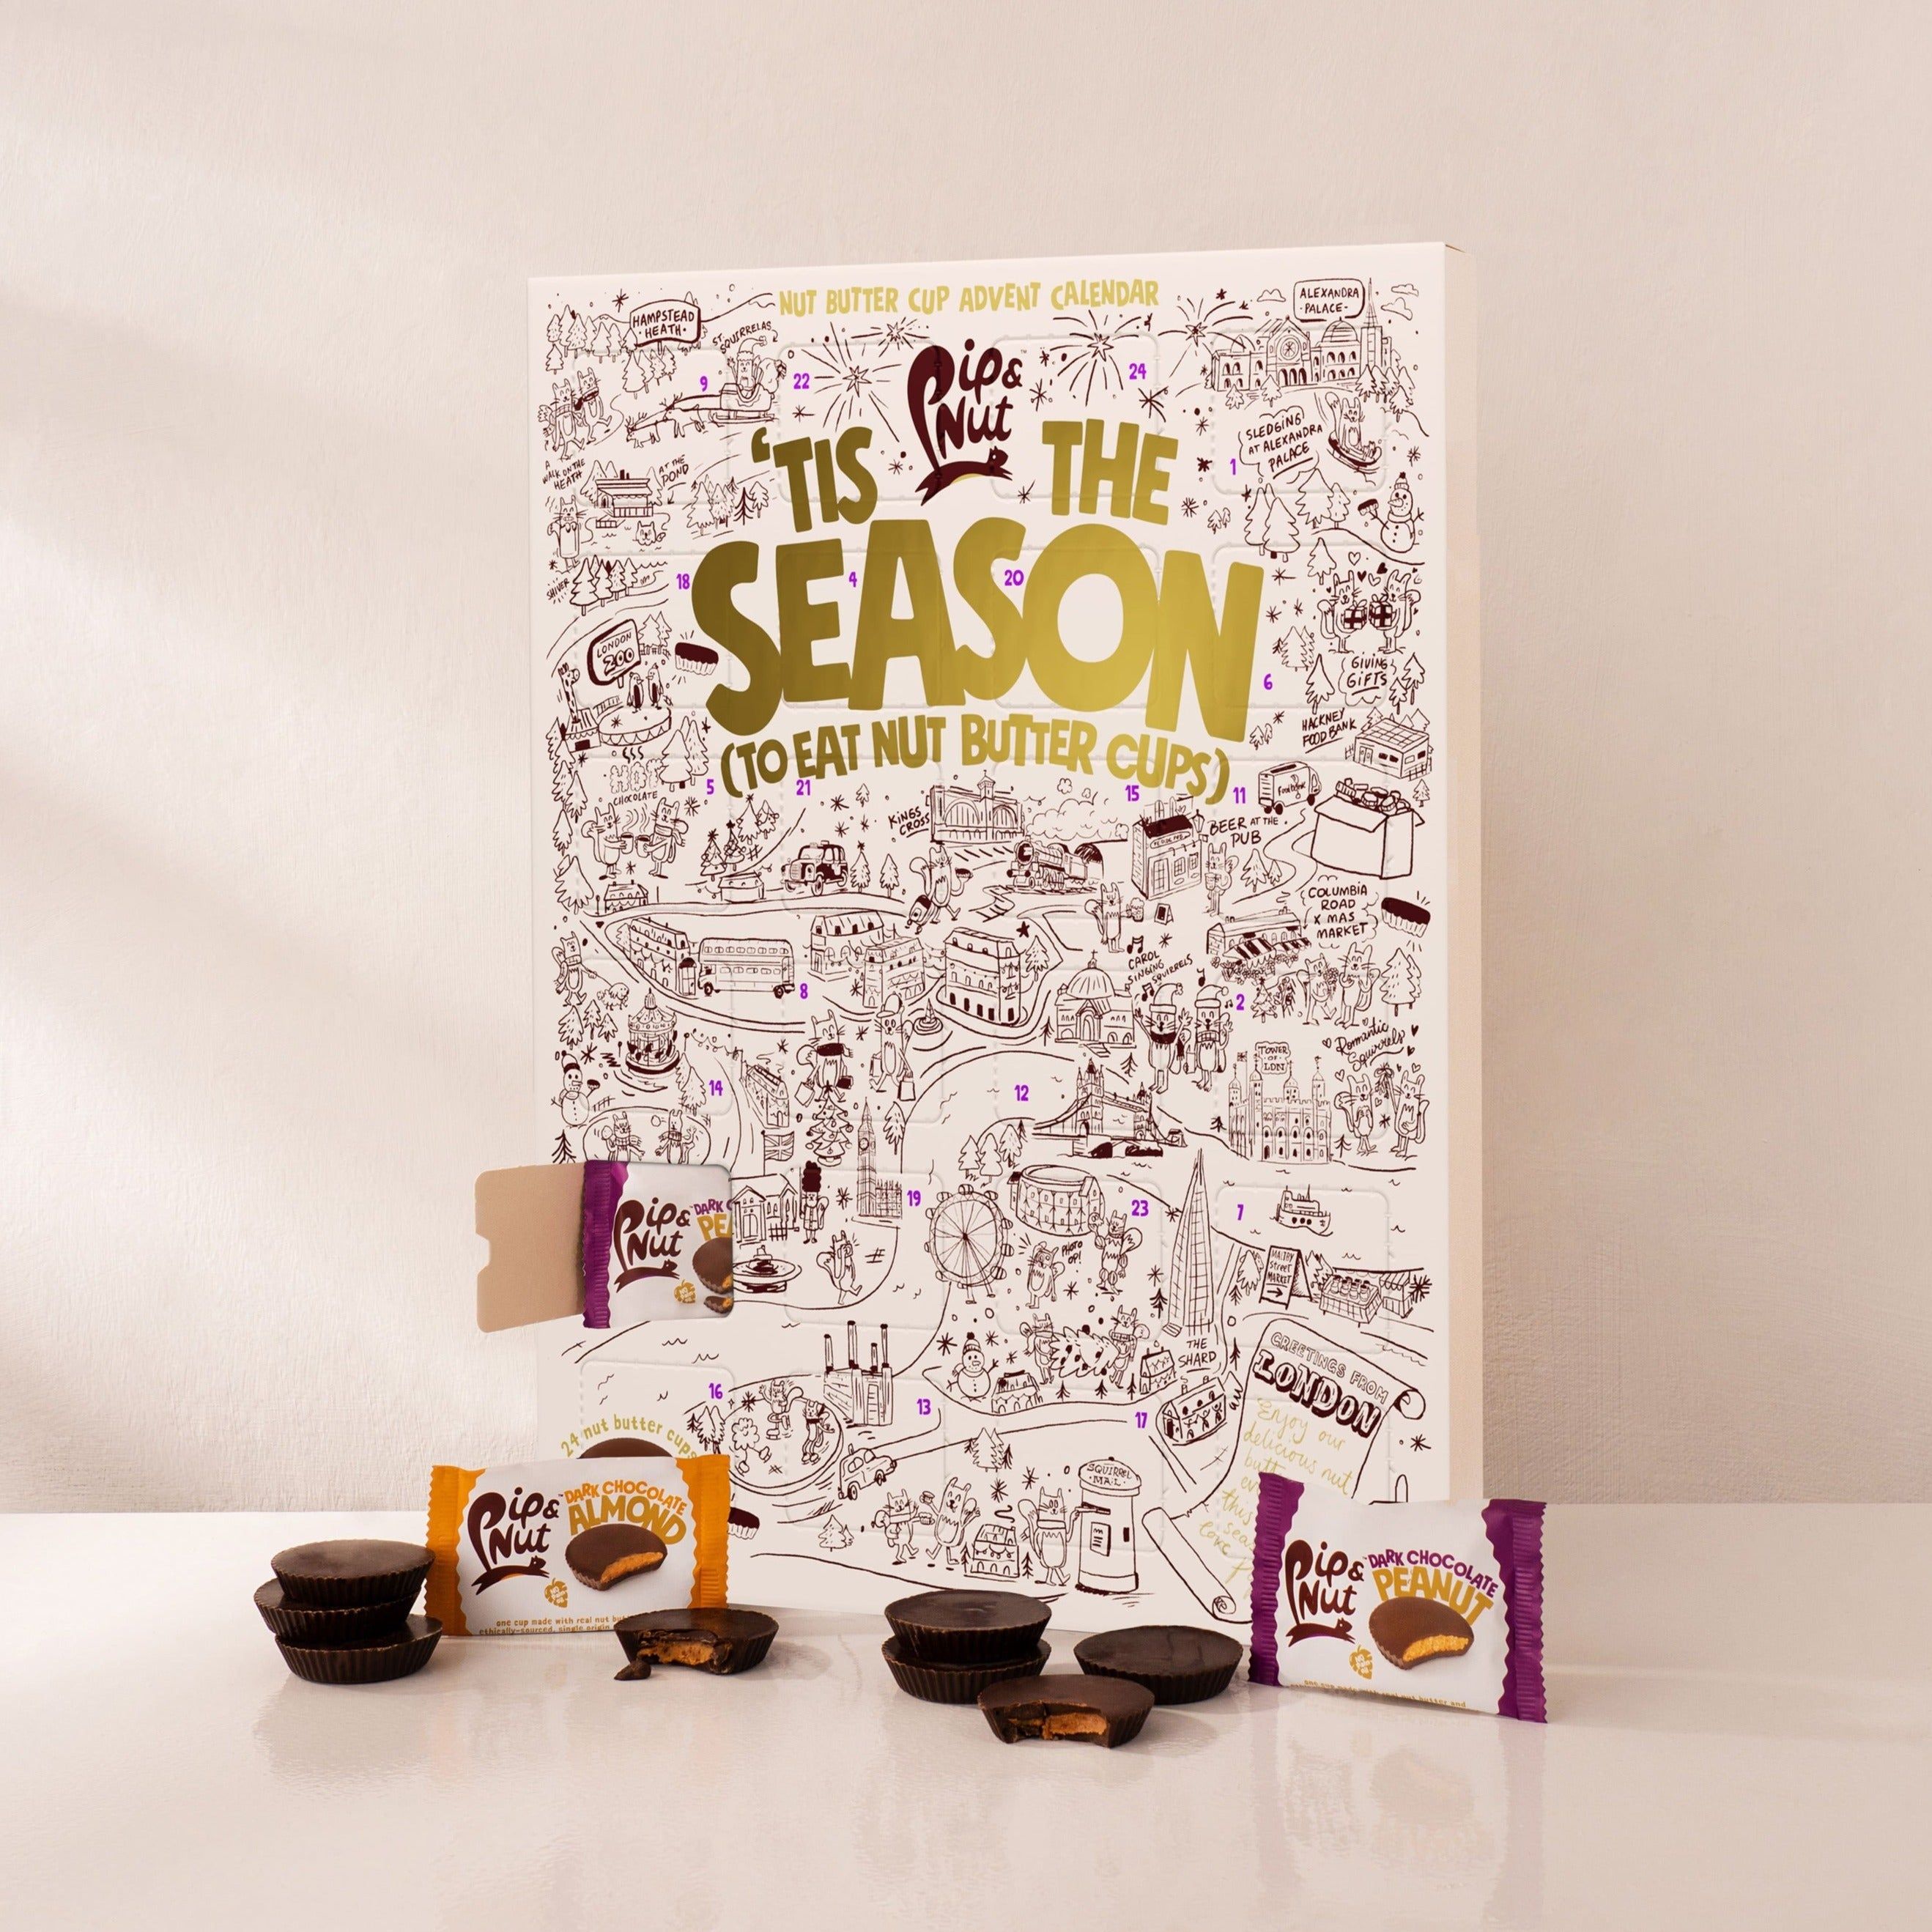 Sports advent calendars: The best for runners